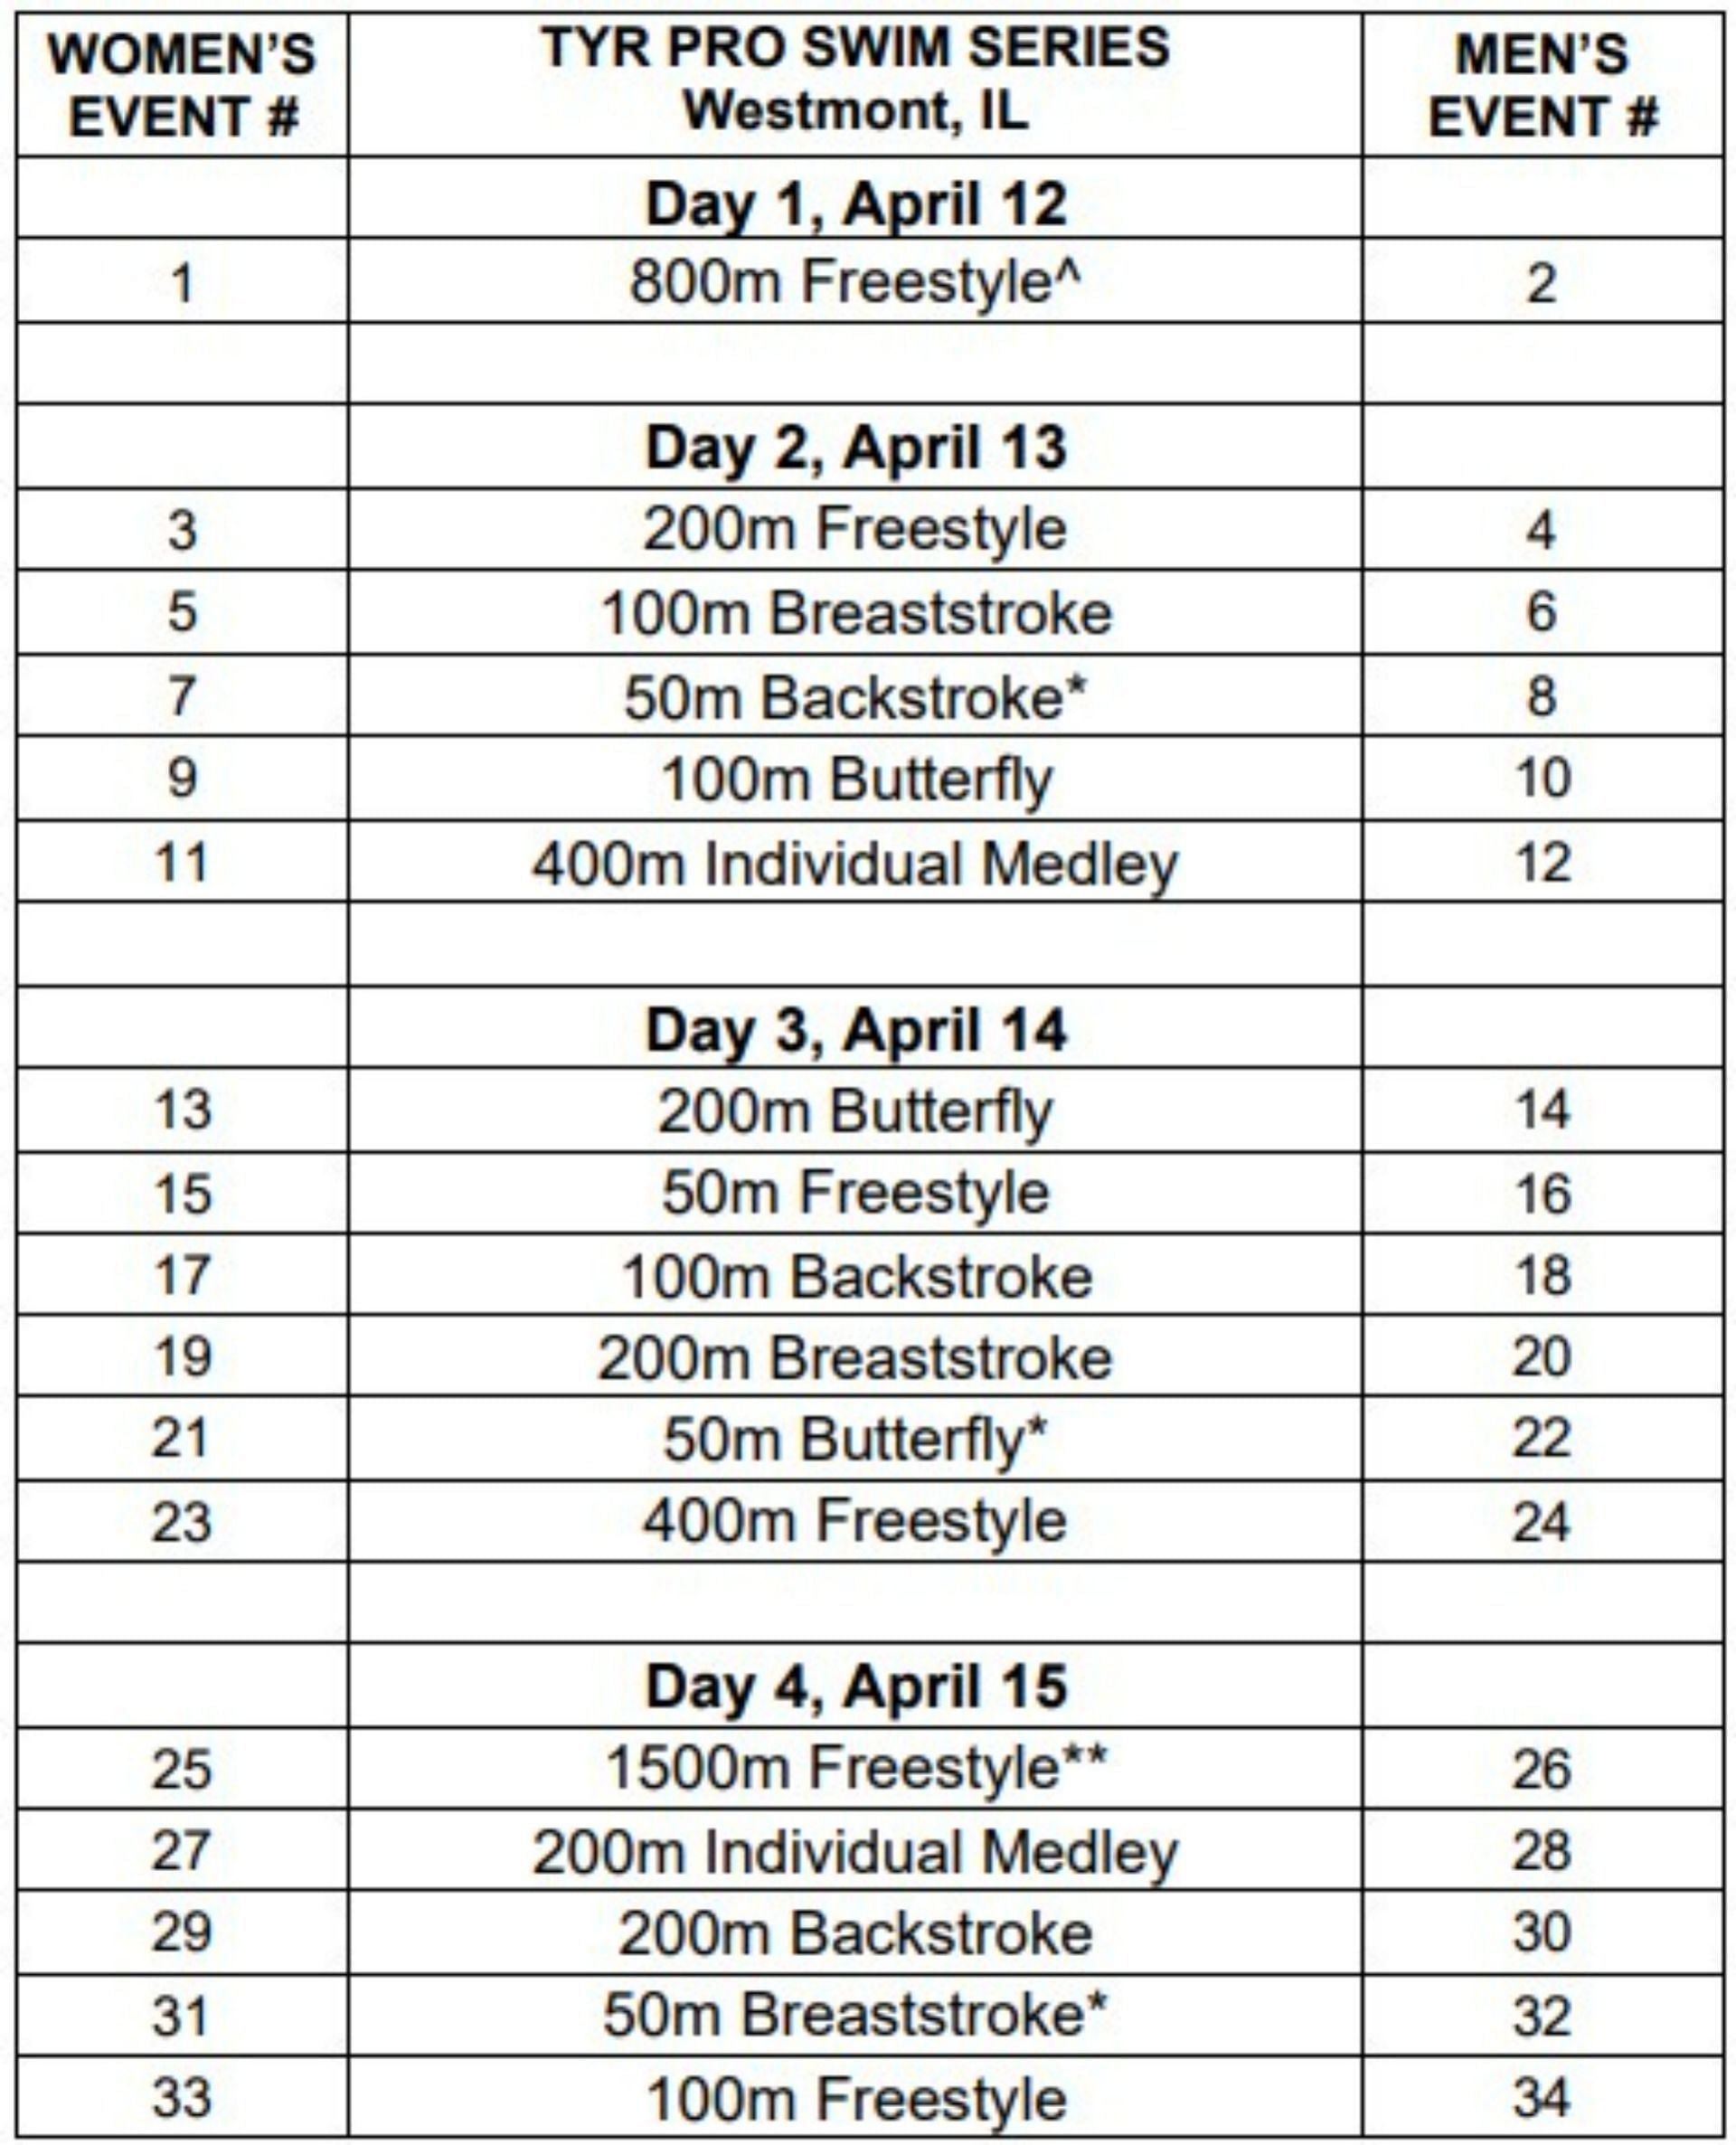 TYR Pro Swim Series Westmont Schedule, venue, tickets, players, and more